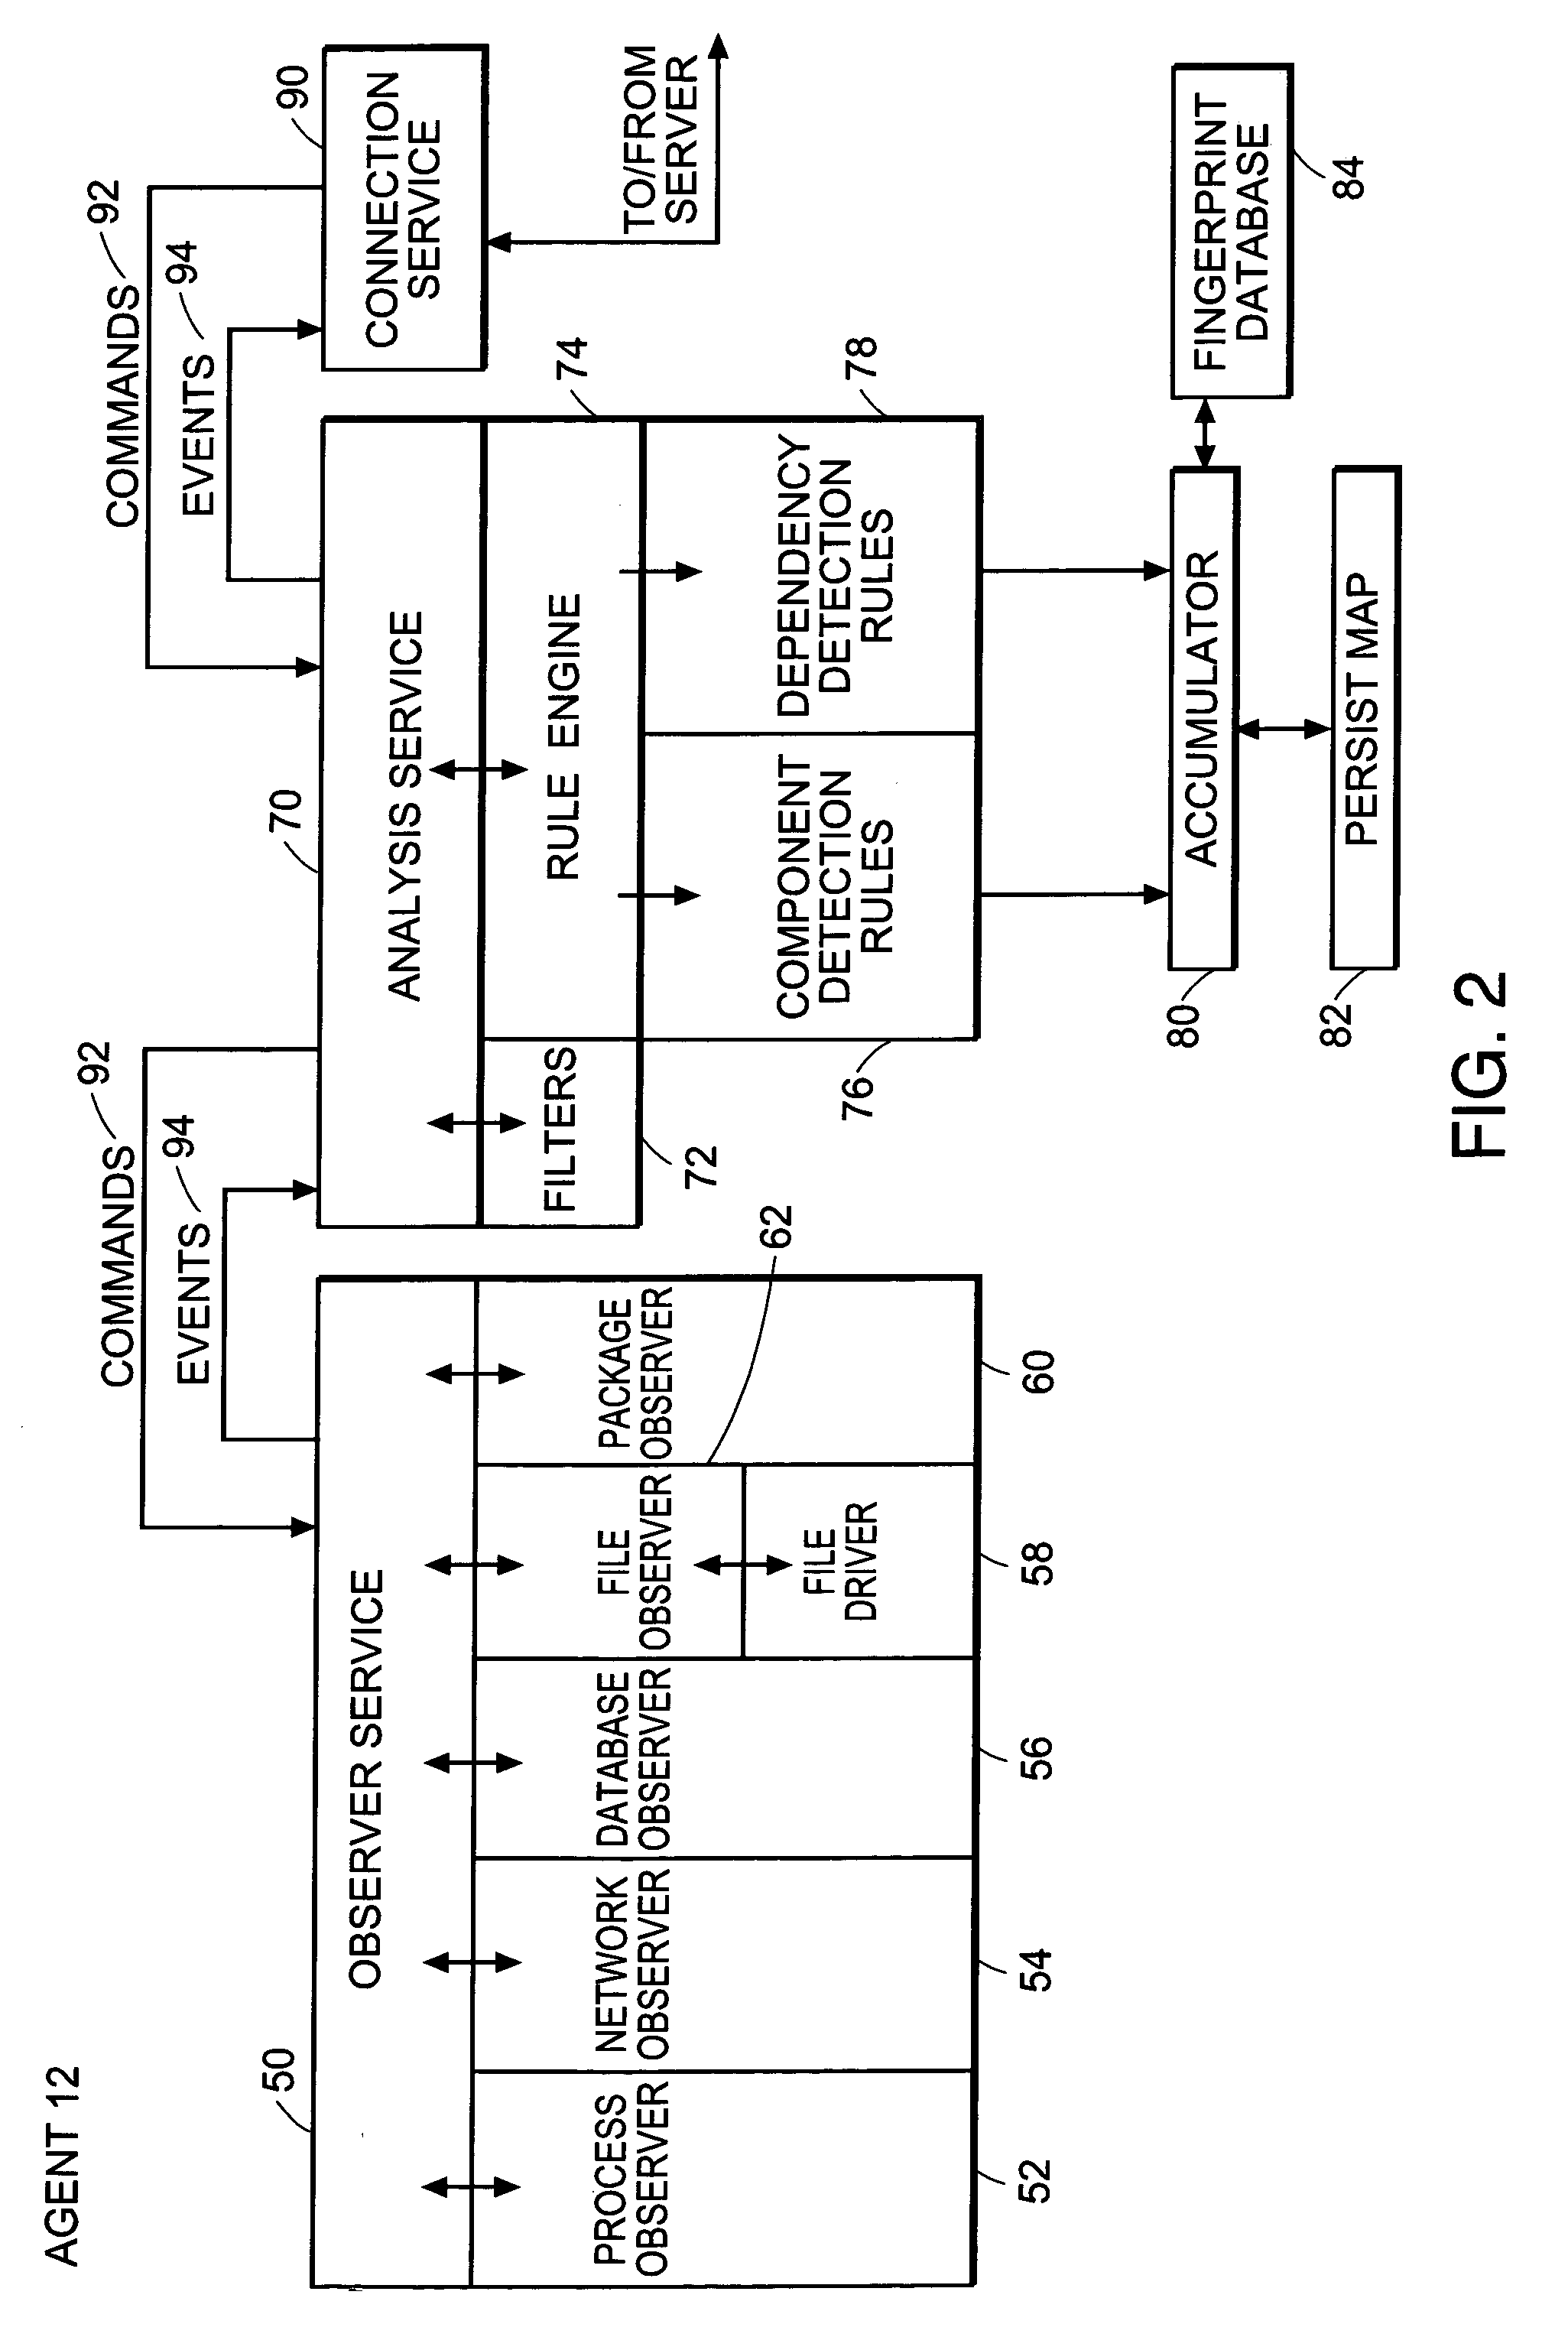 Method and apparatus for managing components in an IT system